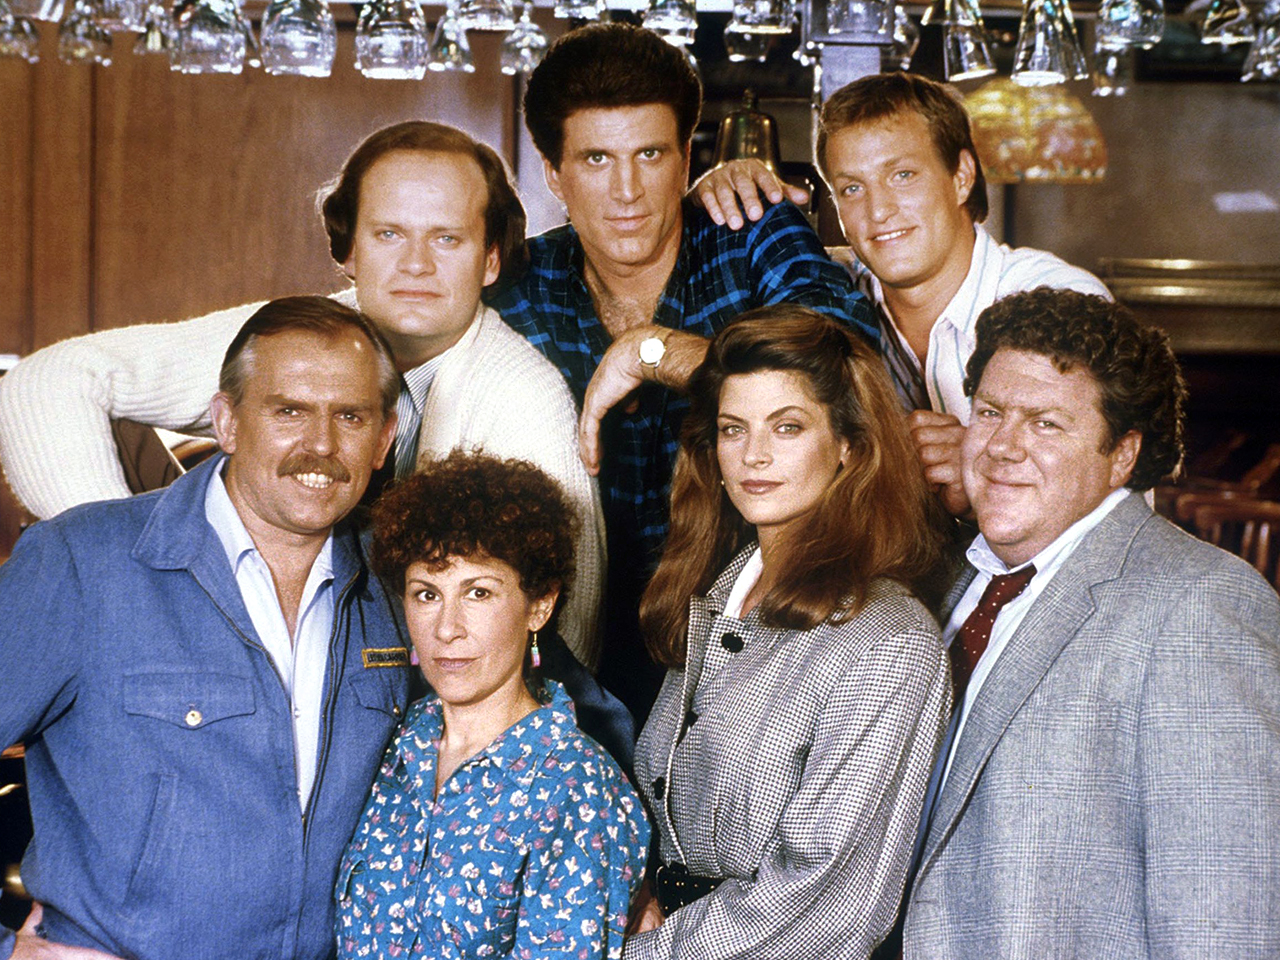 Cheers' last call came 20 years ago: Where are the stars today?